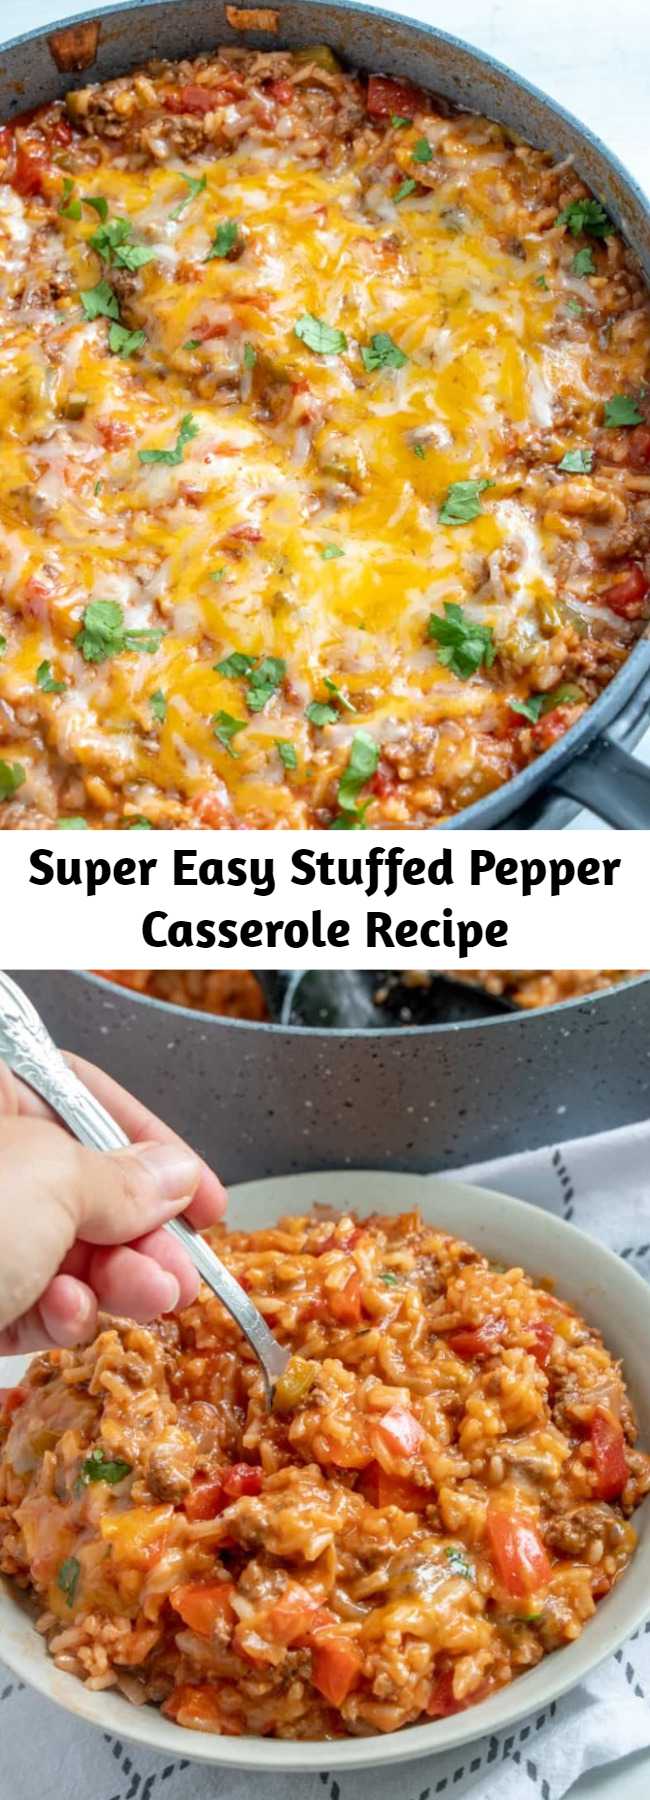 Super Easy Stuffed Pepper Casserole Recipe - This Stuffed Pepper Casserole has all the delicious flavors of regular stuffed peppers but turned inside out and made in one pan, keeping the mess to a minimum! #dinnertime #beef #cheesy #recipe #easyrecipe #tasty